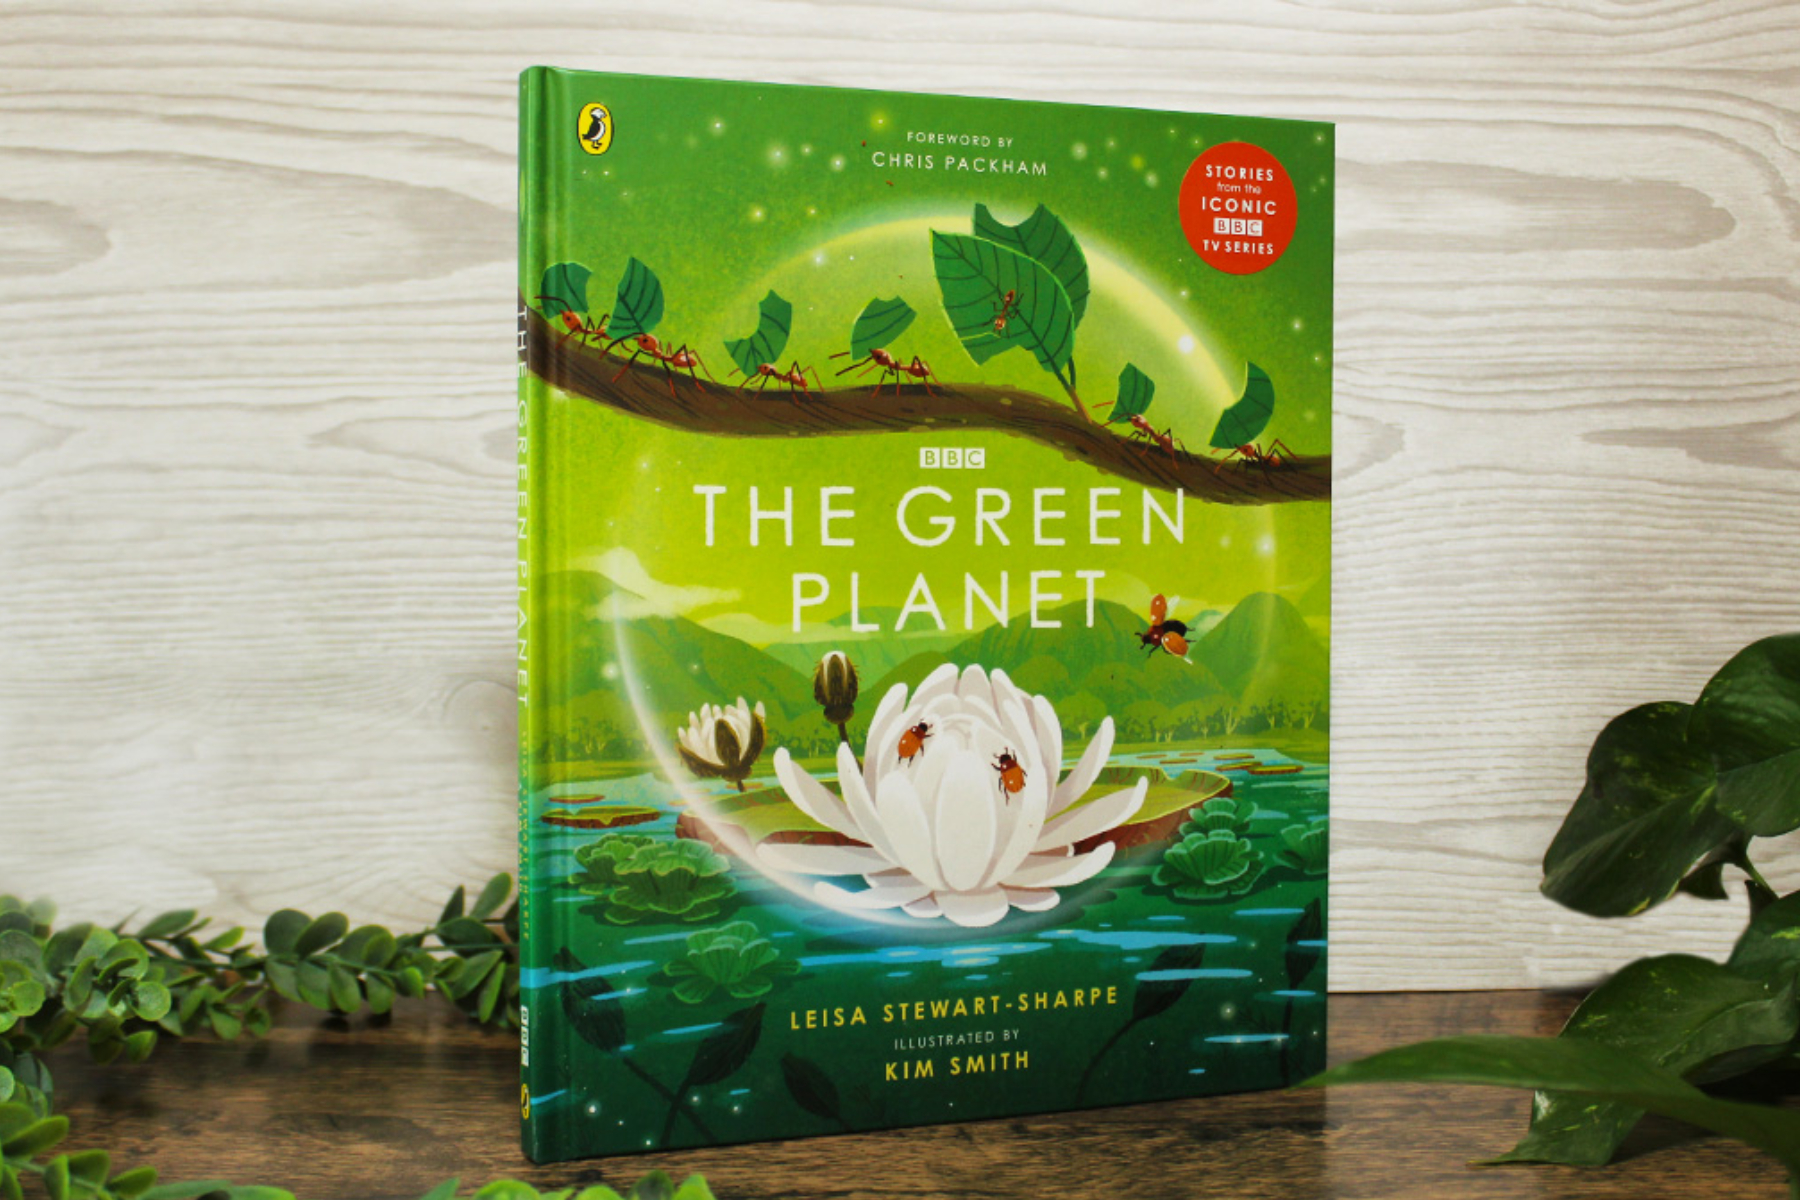 A photo of a copy of The Green Planet book propped up against a wooden background surrounded by plants